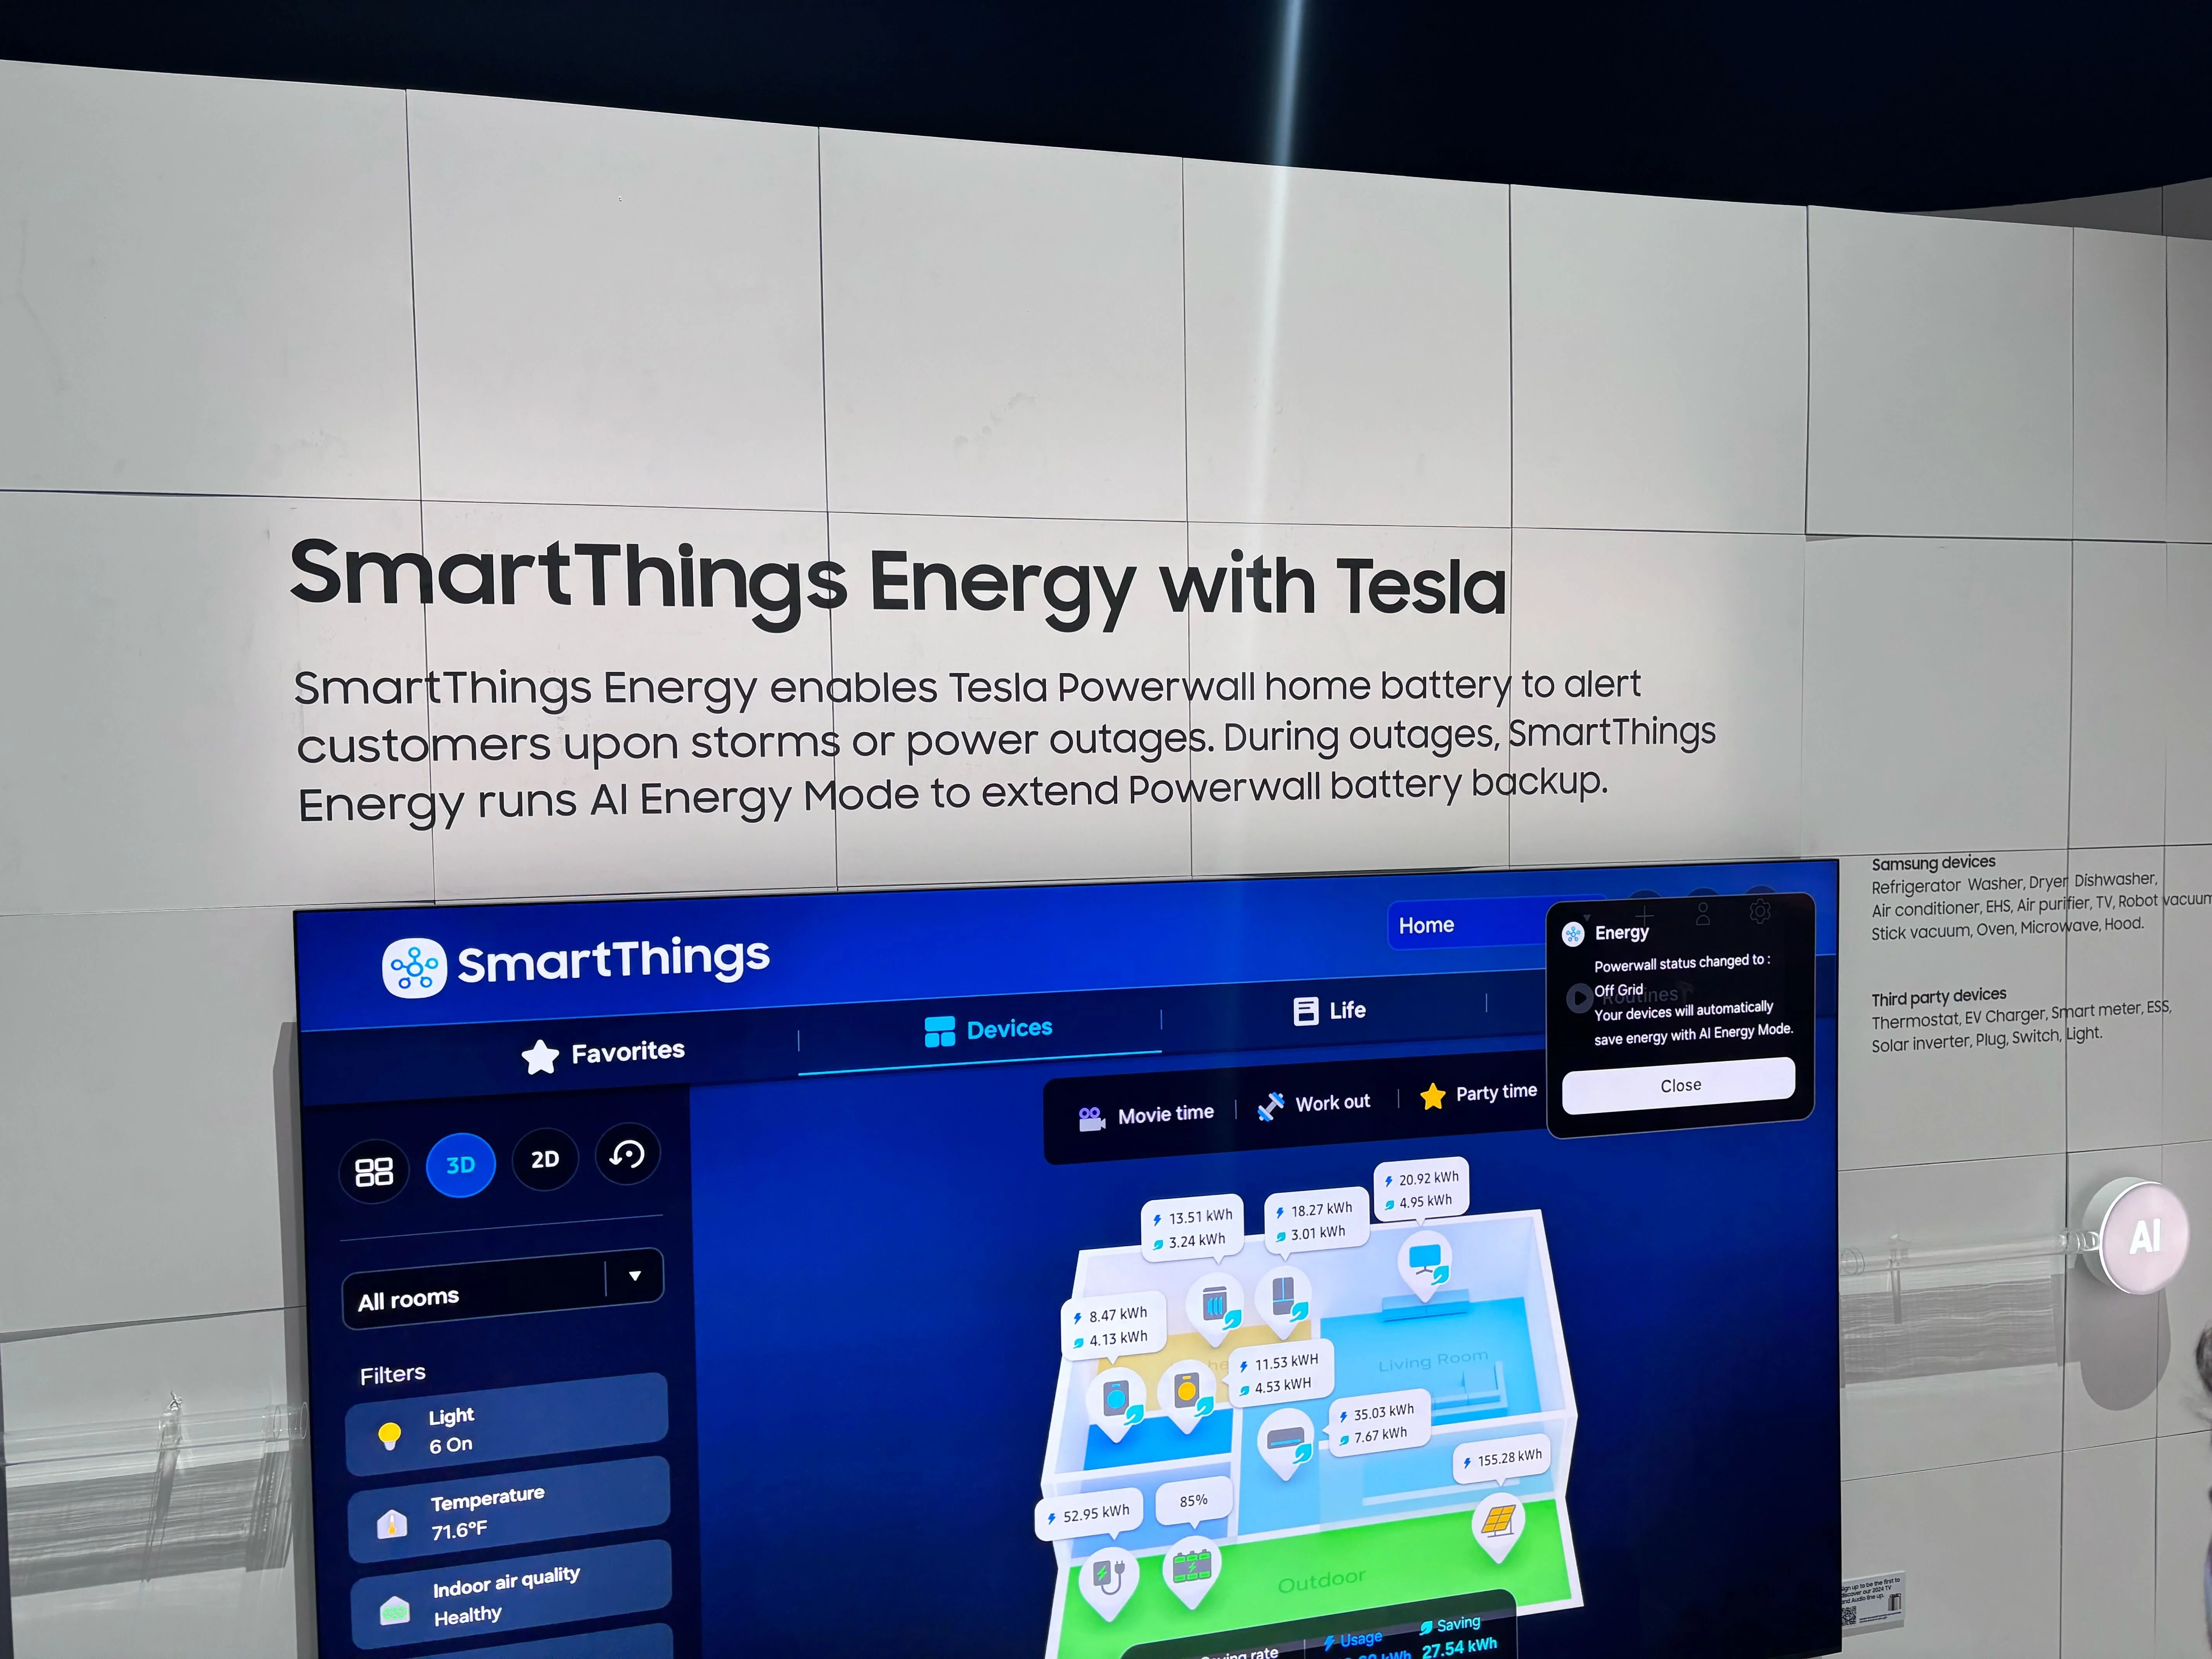 Coming soon: Tesla’s universal wall connector, Powerwall 3 and Solar Inverter can be integrated into Samsung’s Smart Things home ecosystem. The key thing here is the Powerwall.